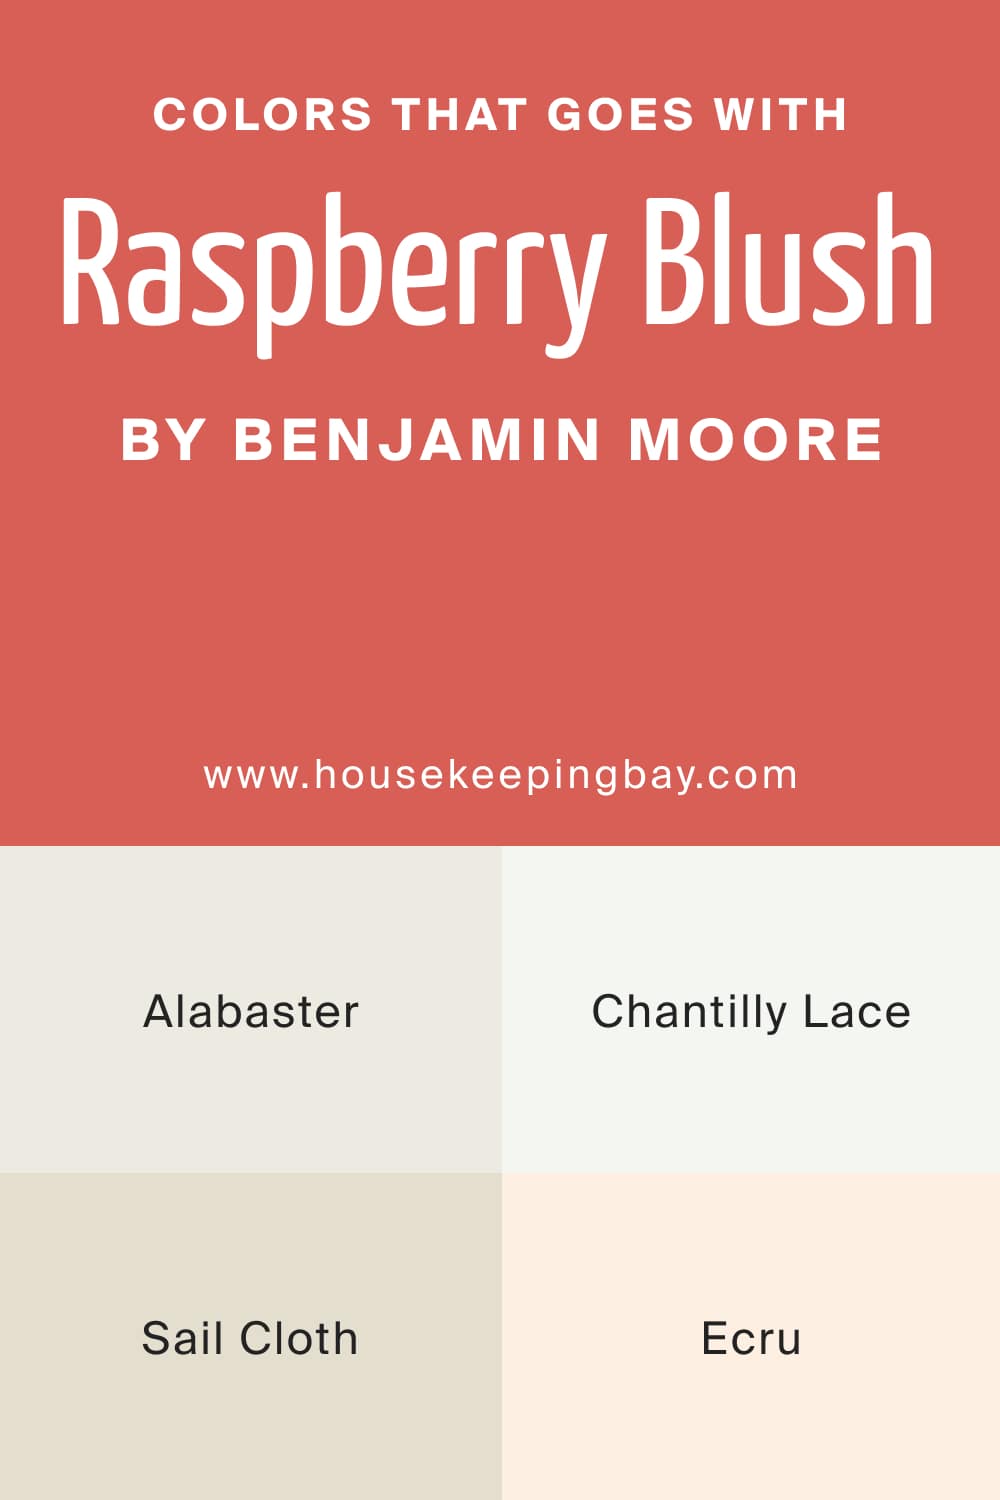 Colors that goes with Raspberry Blush 2008 30 by Benjamin Moore